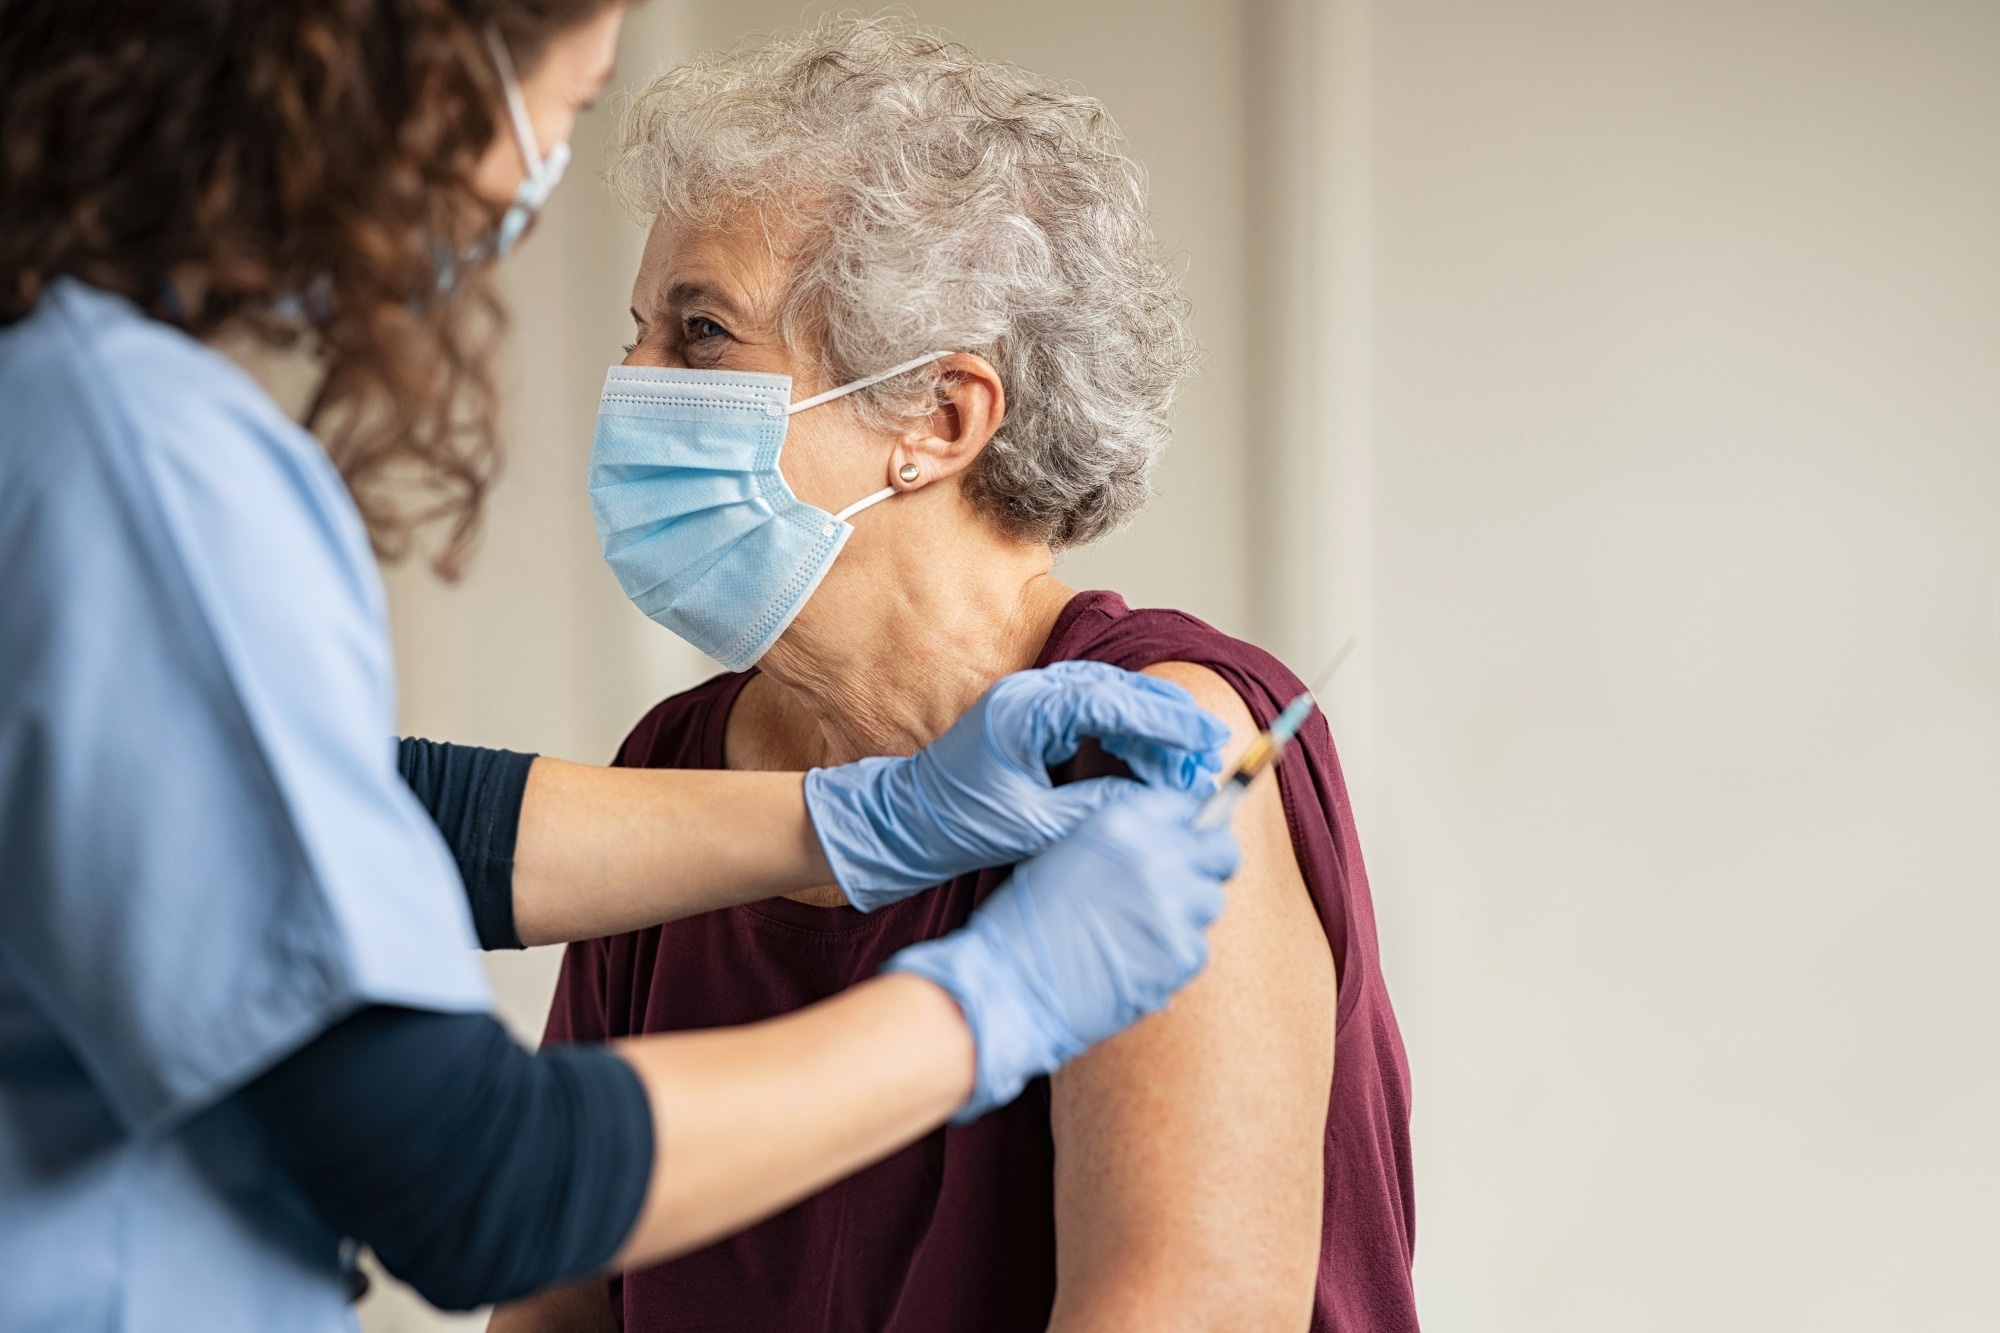 Study: Systems immunology reveals the molecular mechanisms of heterogeneous influenza vaccine response in the elderly. Image Credit: GroundPicture/Shutterstock.com